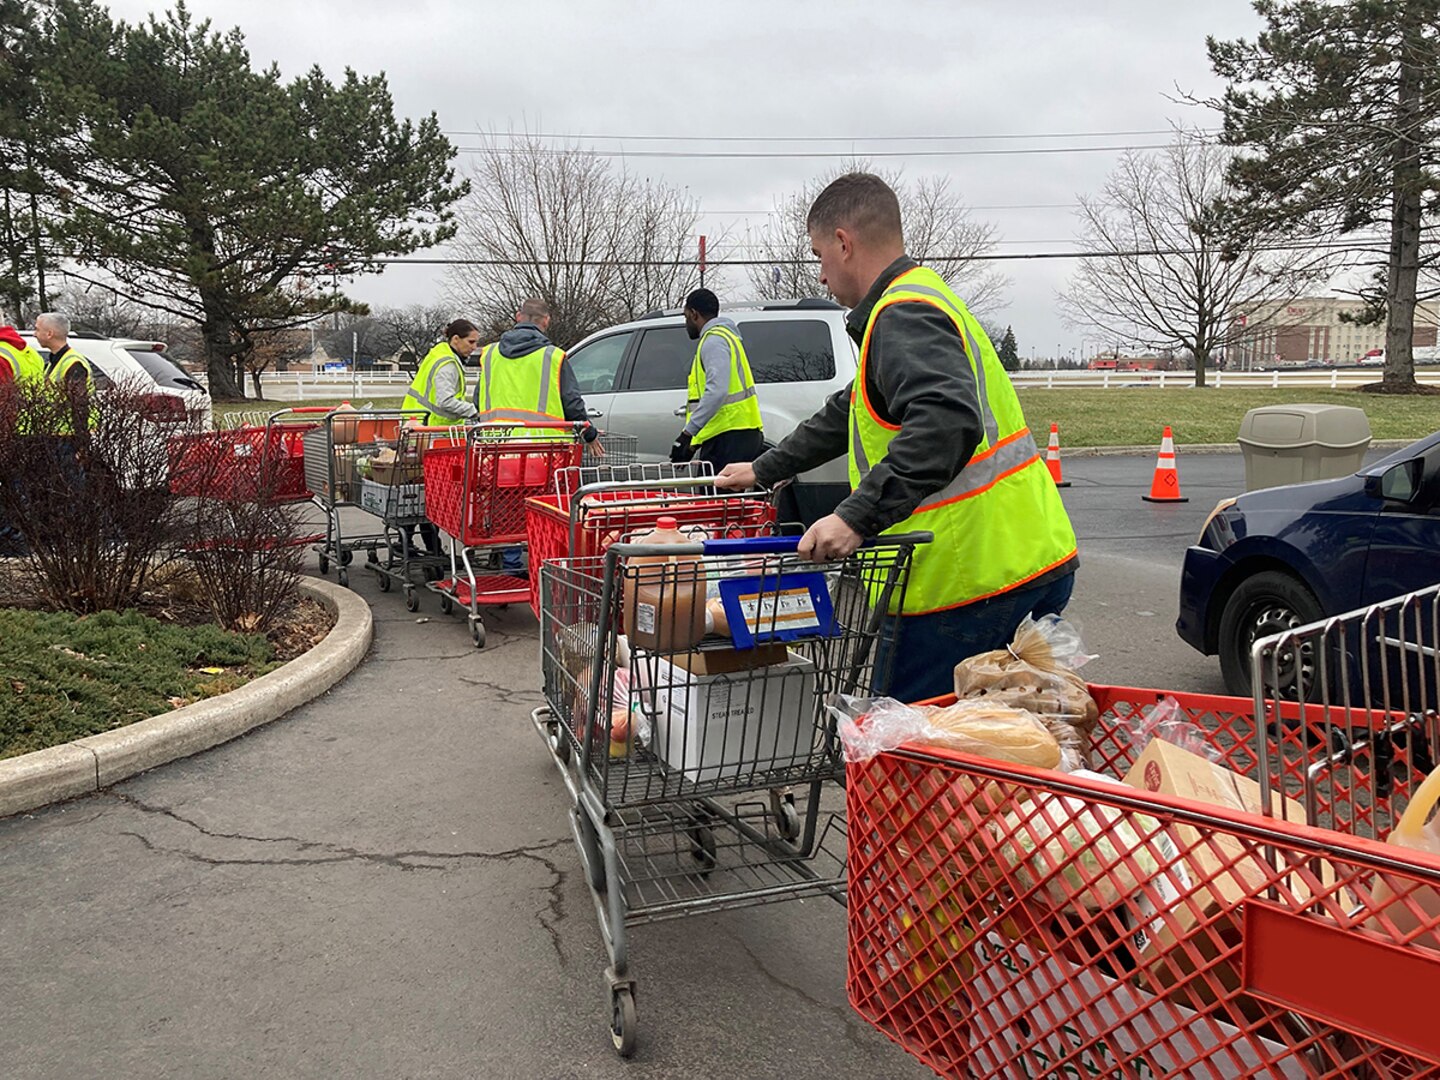 Several men wearing reflective vests handle shopping carts full of food in a outdoor food distribution area in a parking lot.